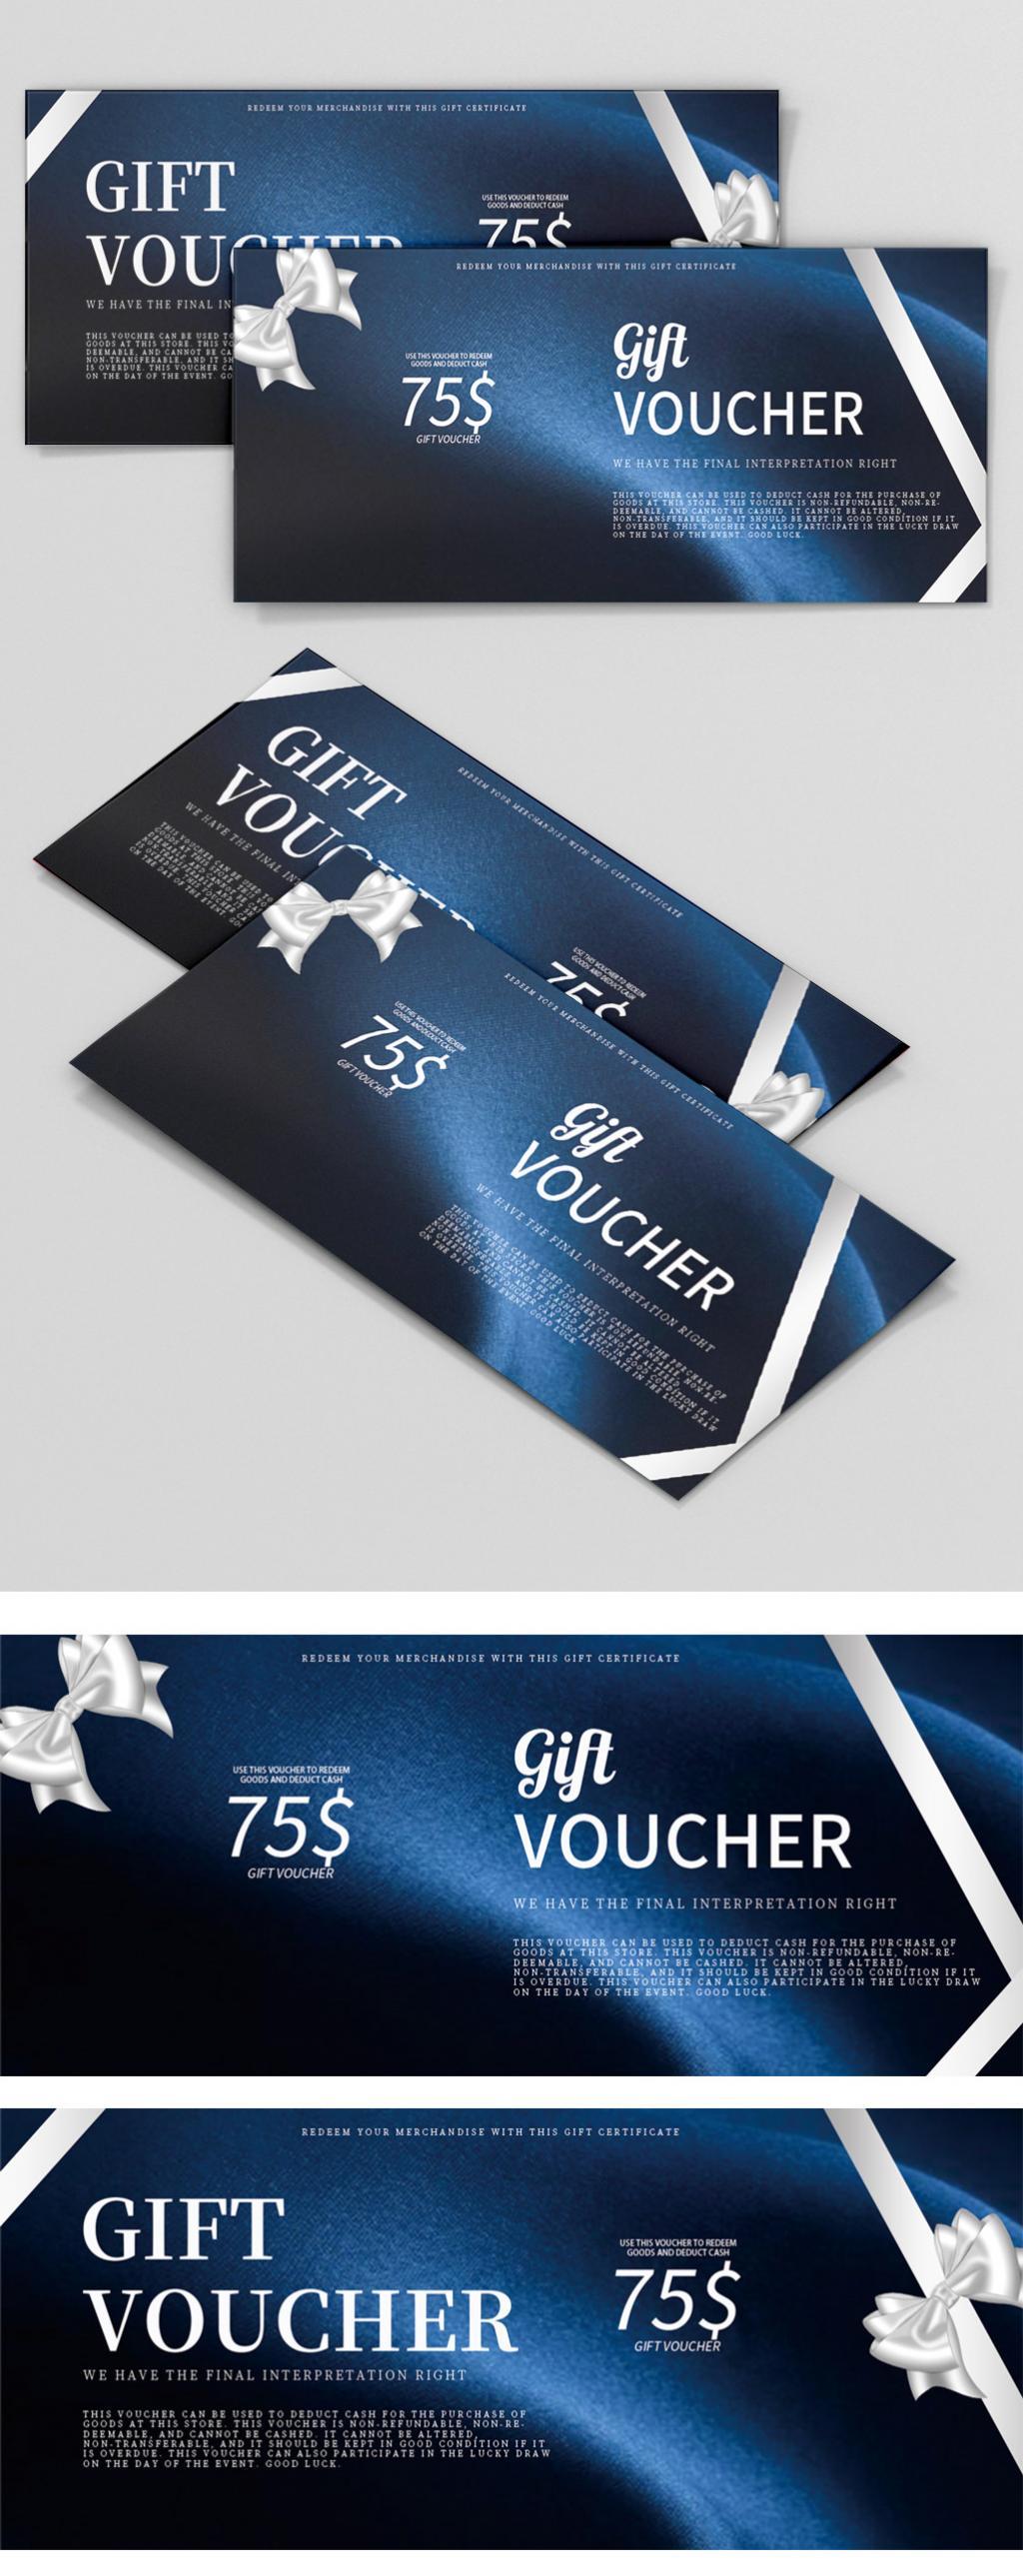 blue-style-gift-voucher-template-image-picture-free-download-450023617